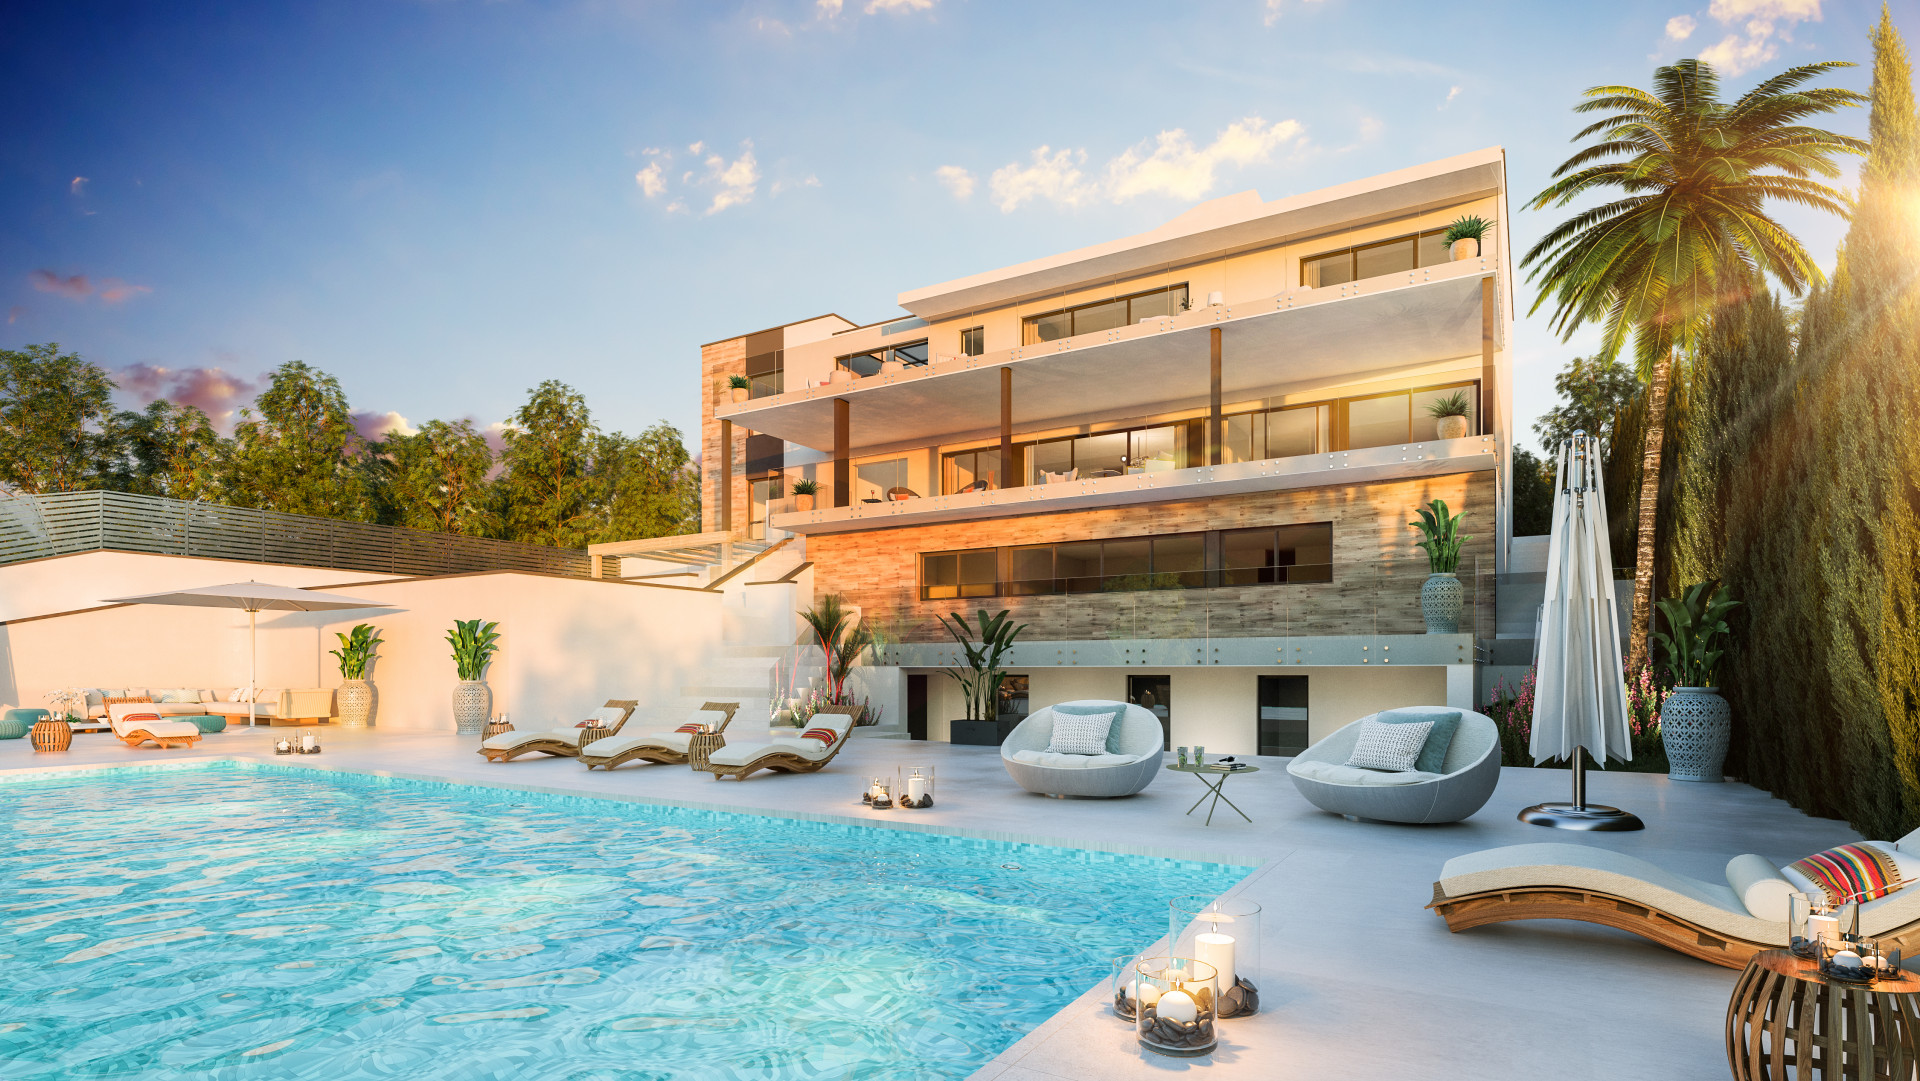 Contemporary villa with panoramic views under construction in Sotogrande.